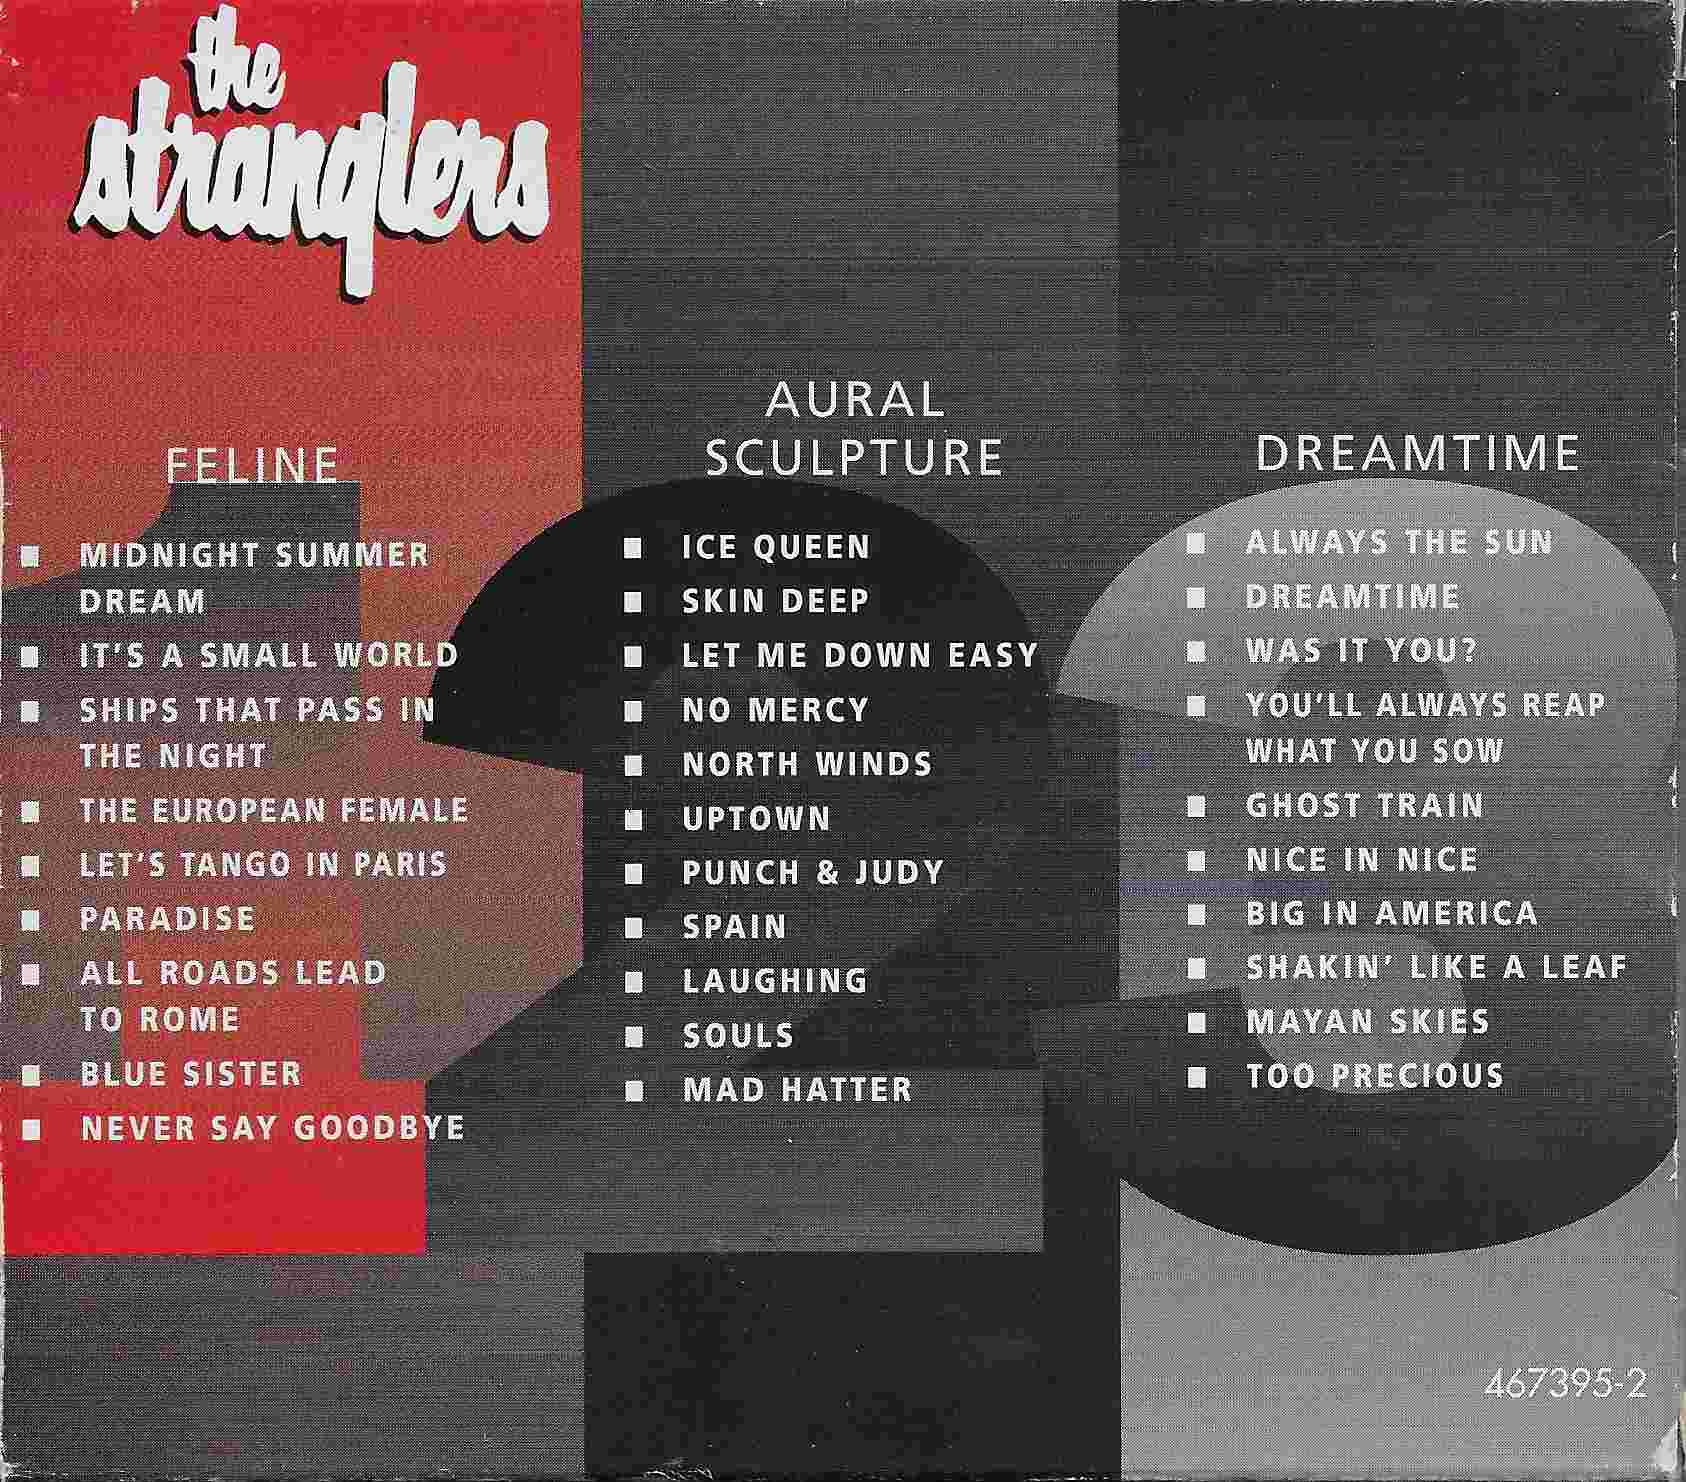 Picture of 467395 2 Feline / Aural sculpture / Dreamtime by artist The Stranglers from The Stranglers